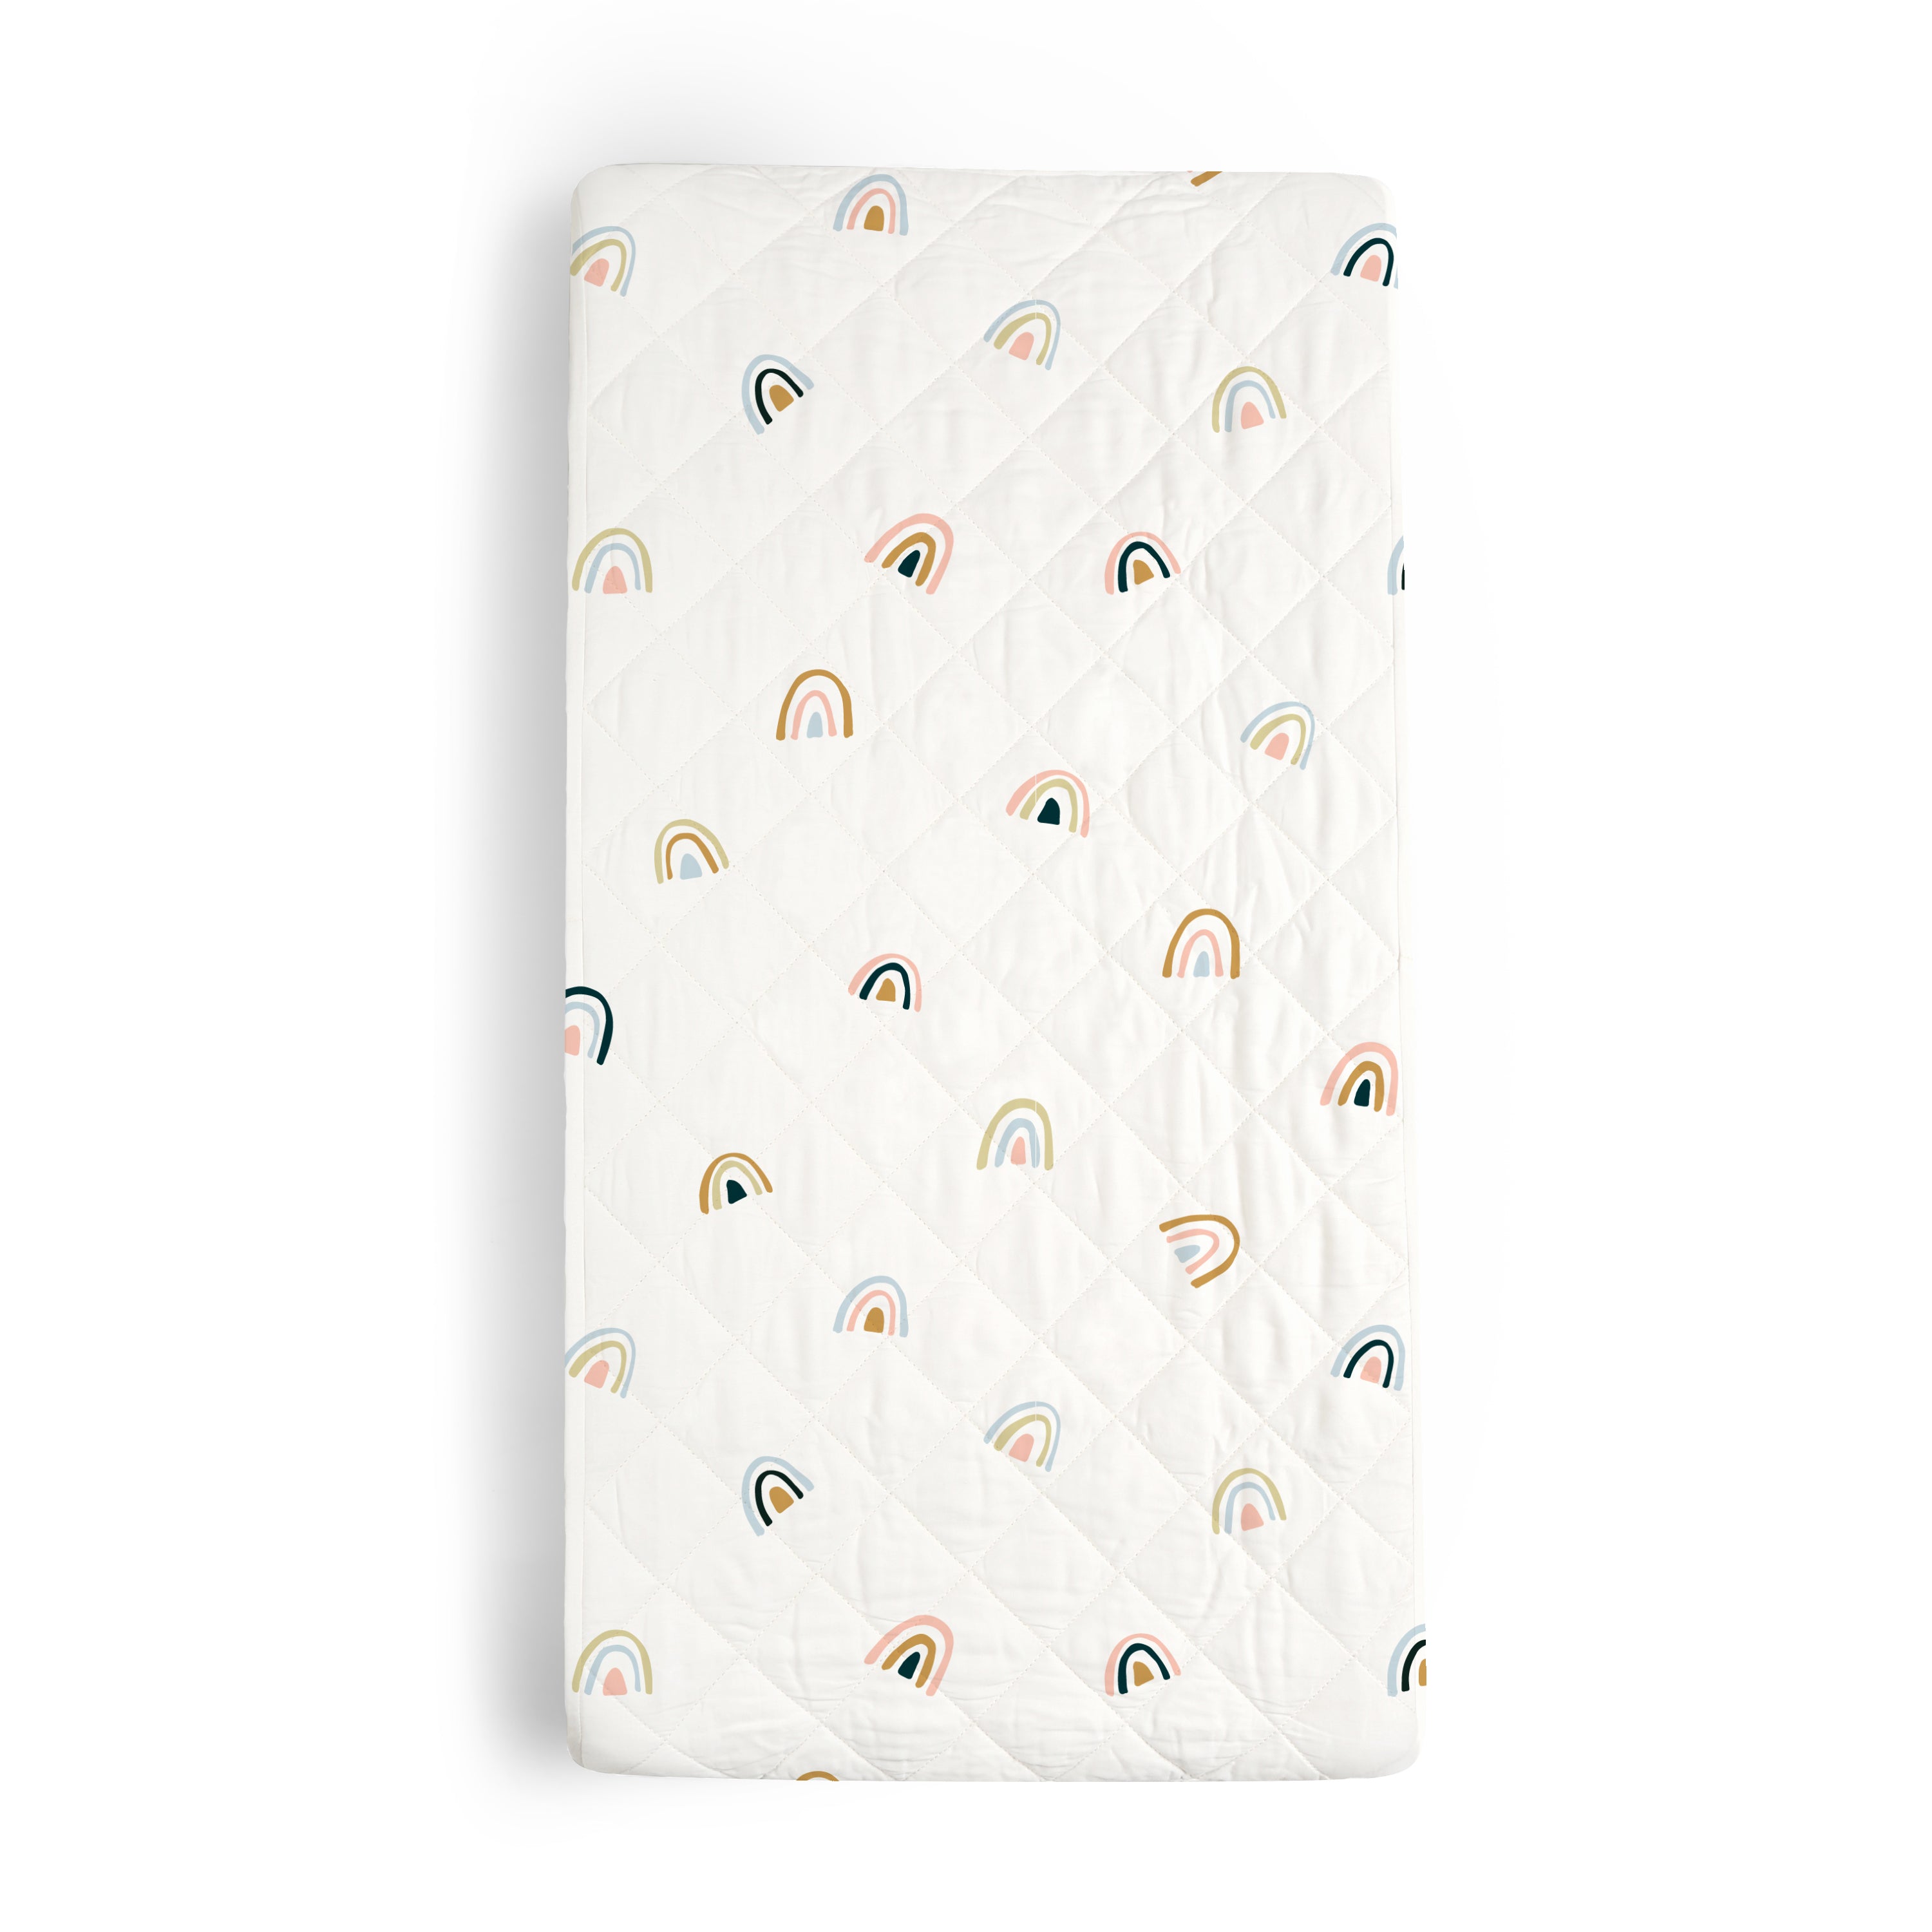 A Makemake Organics Organic Cotton Changing Pad Cover - Rainbow with a white background featuring a pattern of colorful rainbows in shades of pink, blue, and orange, displayed in a vertical orientation.